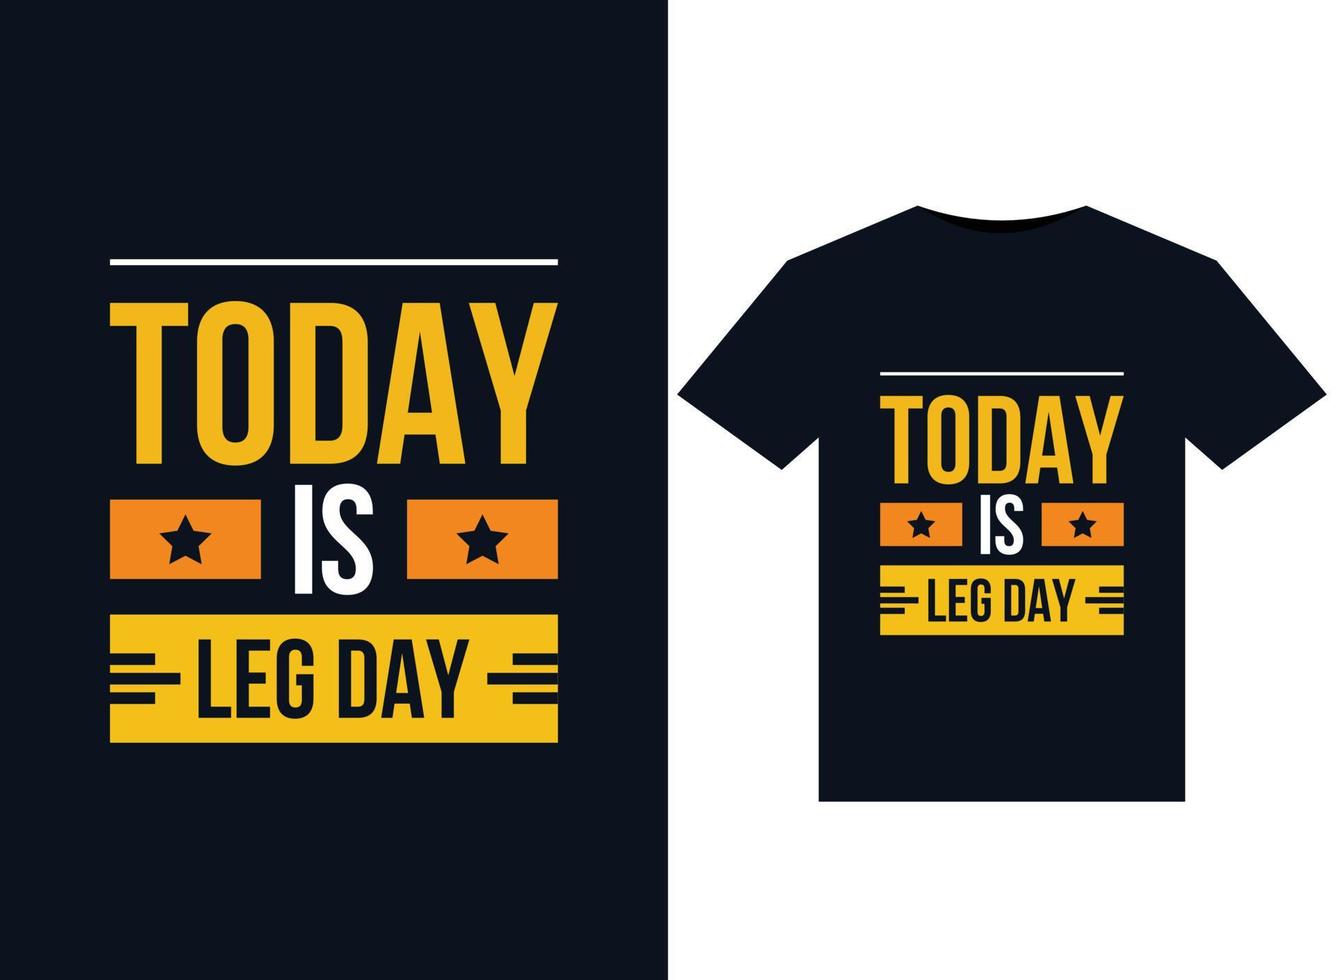 Today is leg day t-shirt design fashion slogan, badge, label clothing, or other printing products. Vector illustration.